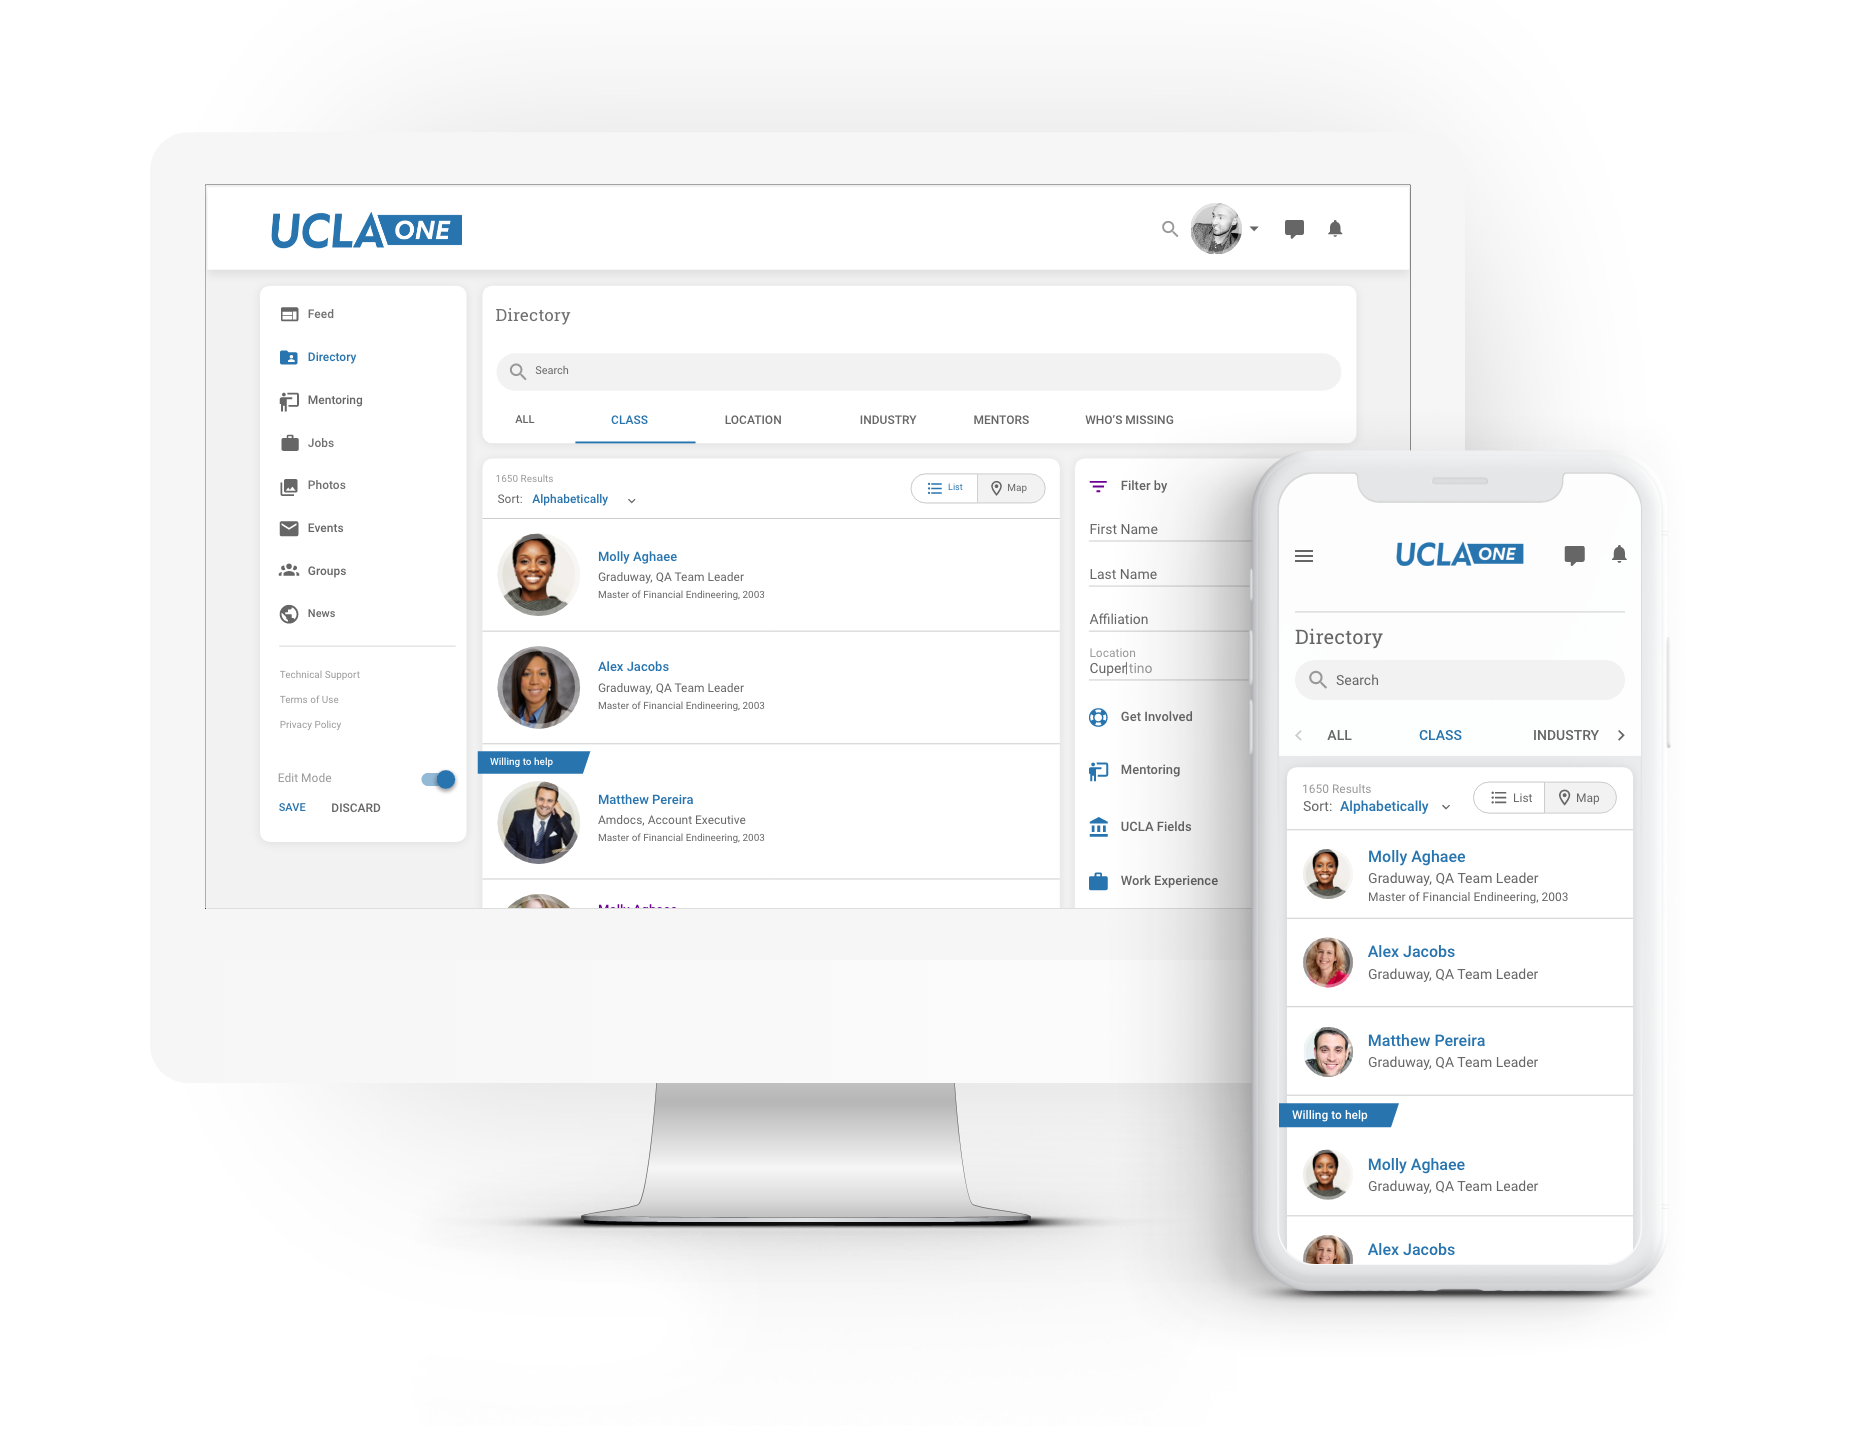 All your alumni in one place - whether looking to connect with an old classmate or looking for professional advice, the directory makes your network reachable at the click of a button.